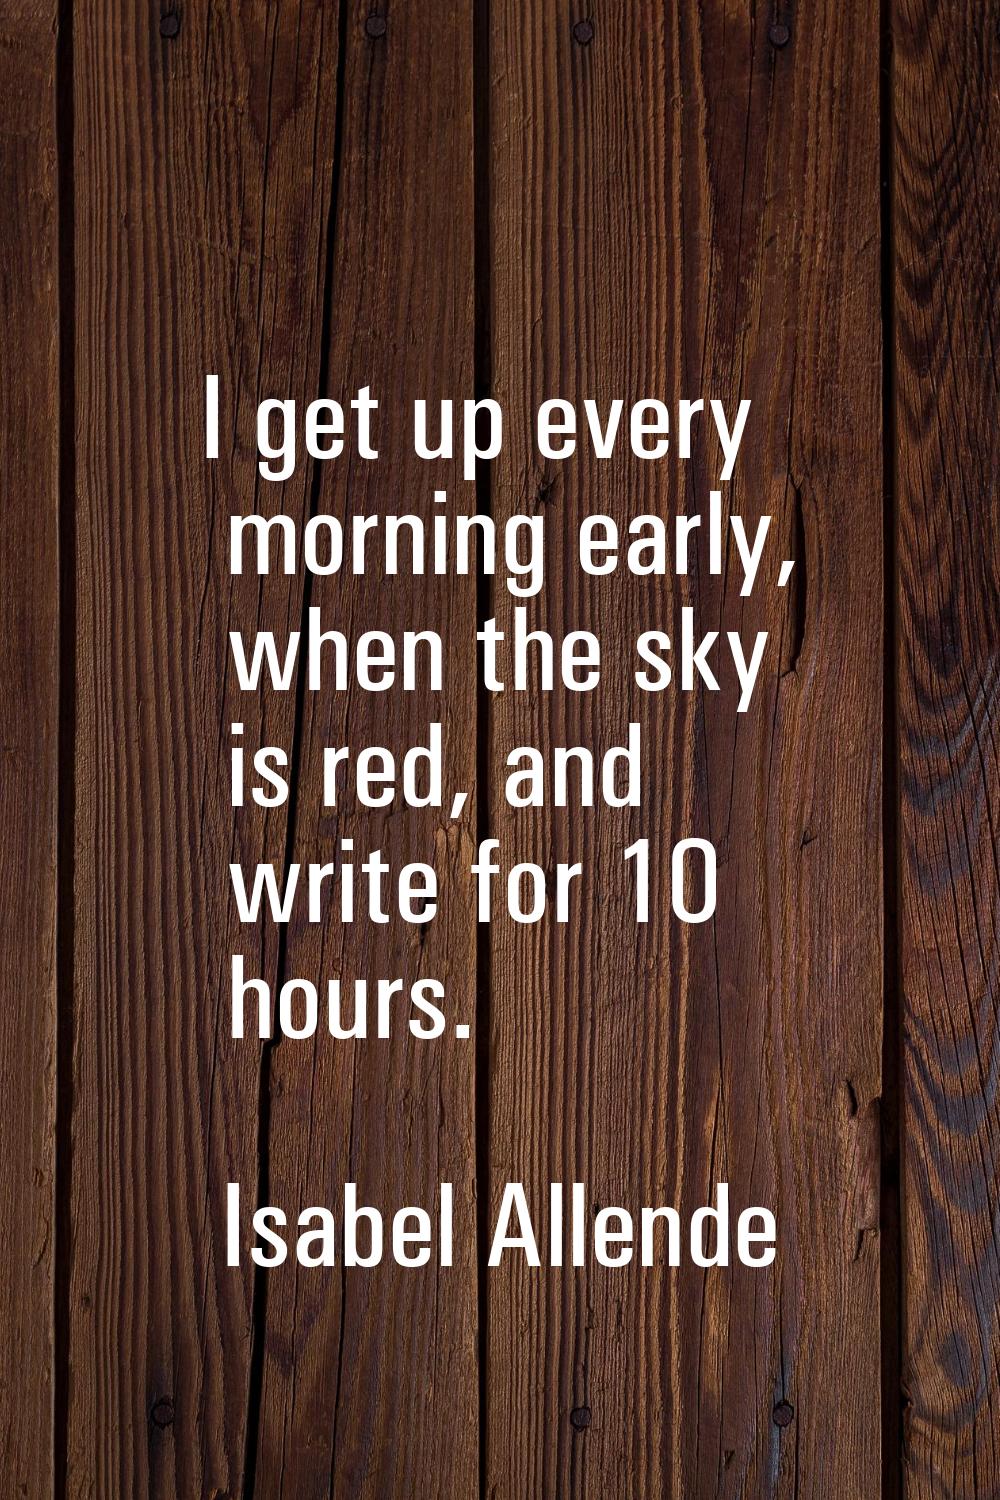 I get up every morning early, when the sky is red, and write for 10 hours.